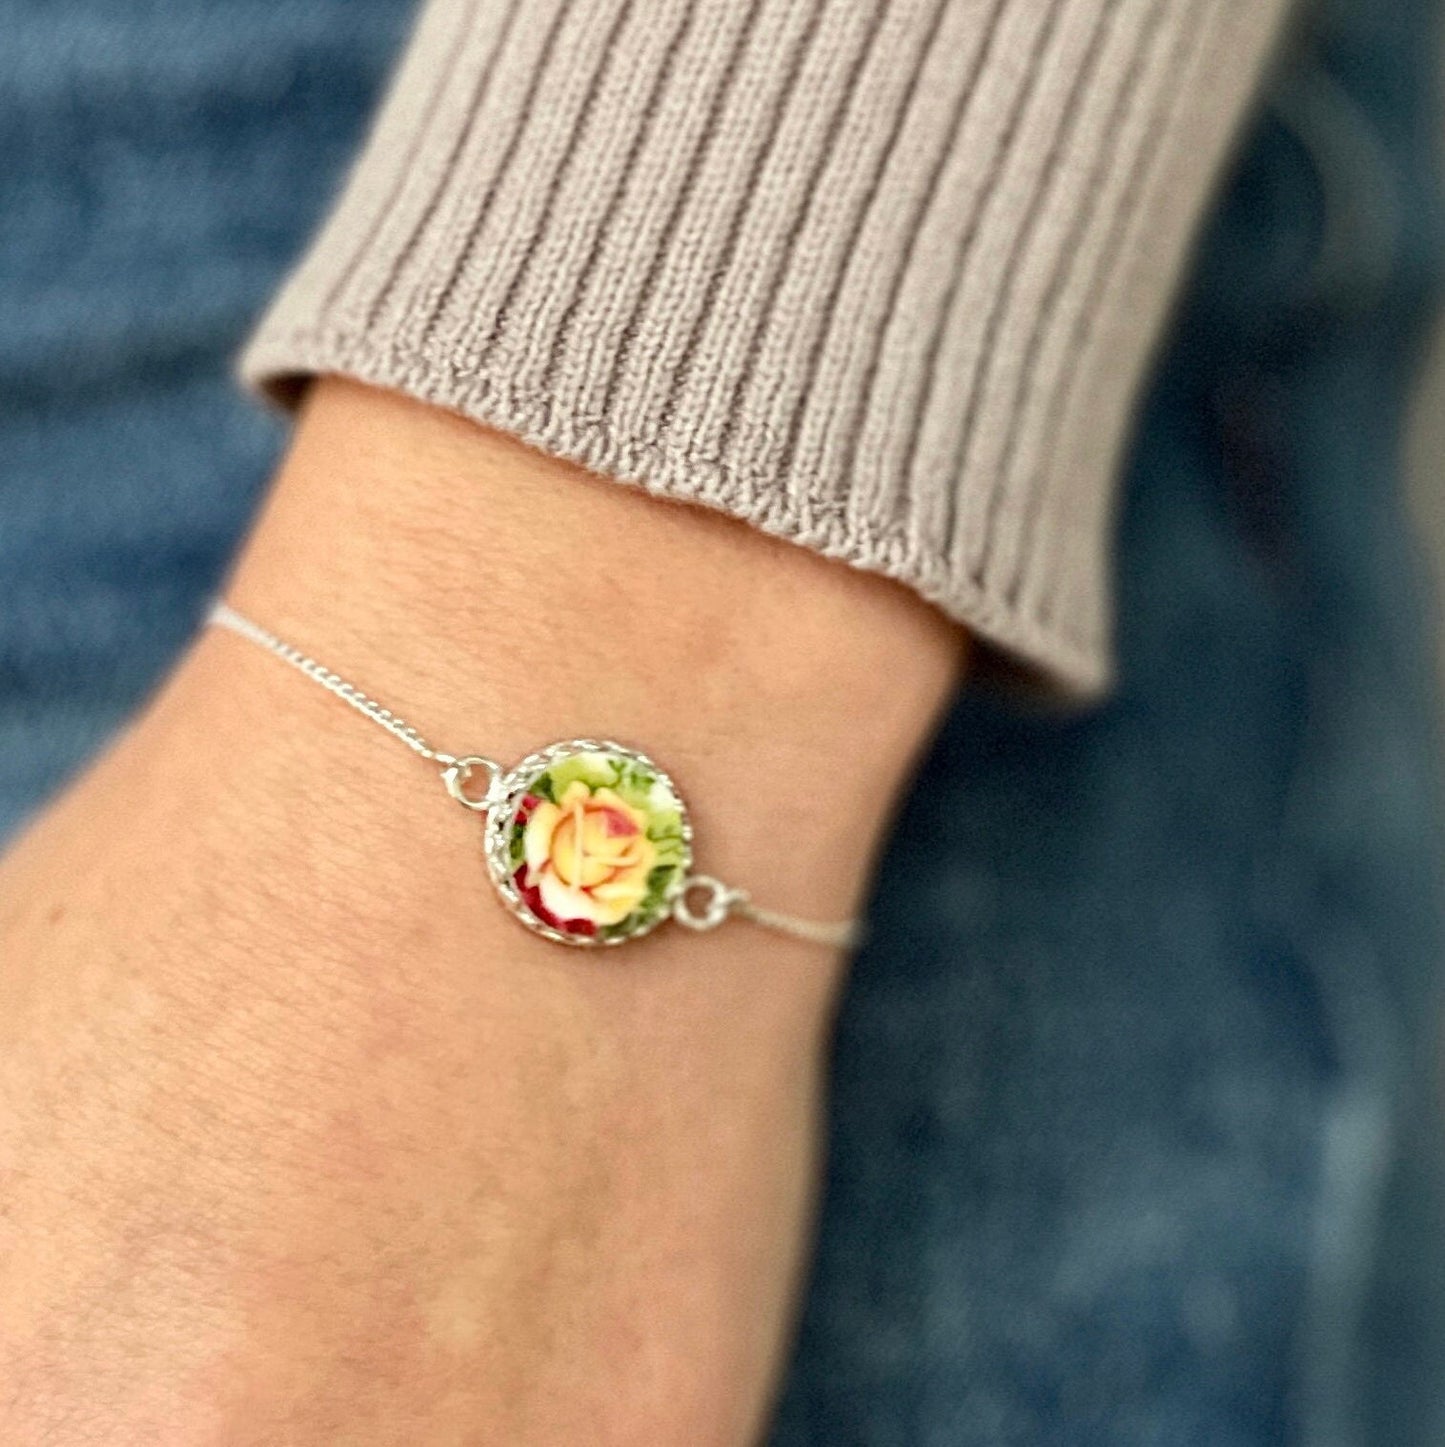 Royal Albert Old Country Roses, Dainty Adjustable Yellow Rose Bracelet, Broken China Jewelry Anniversary Gifts for Women